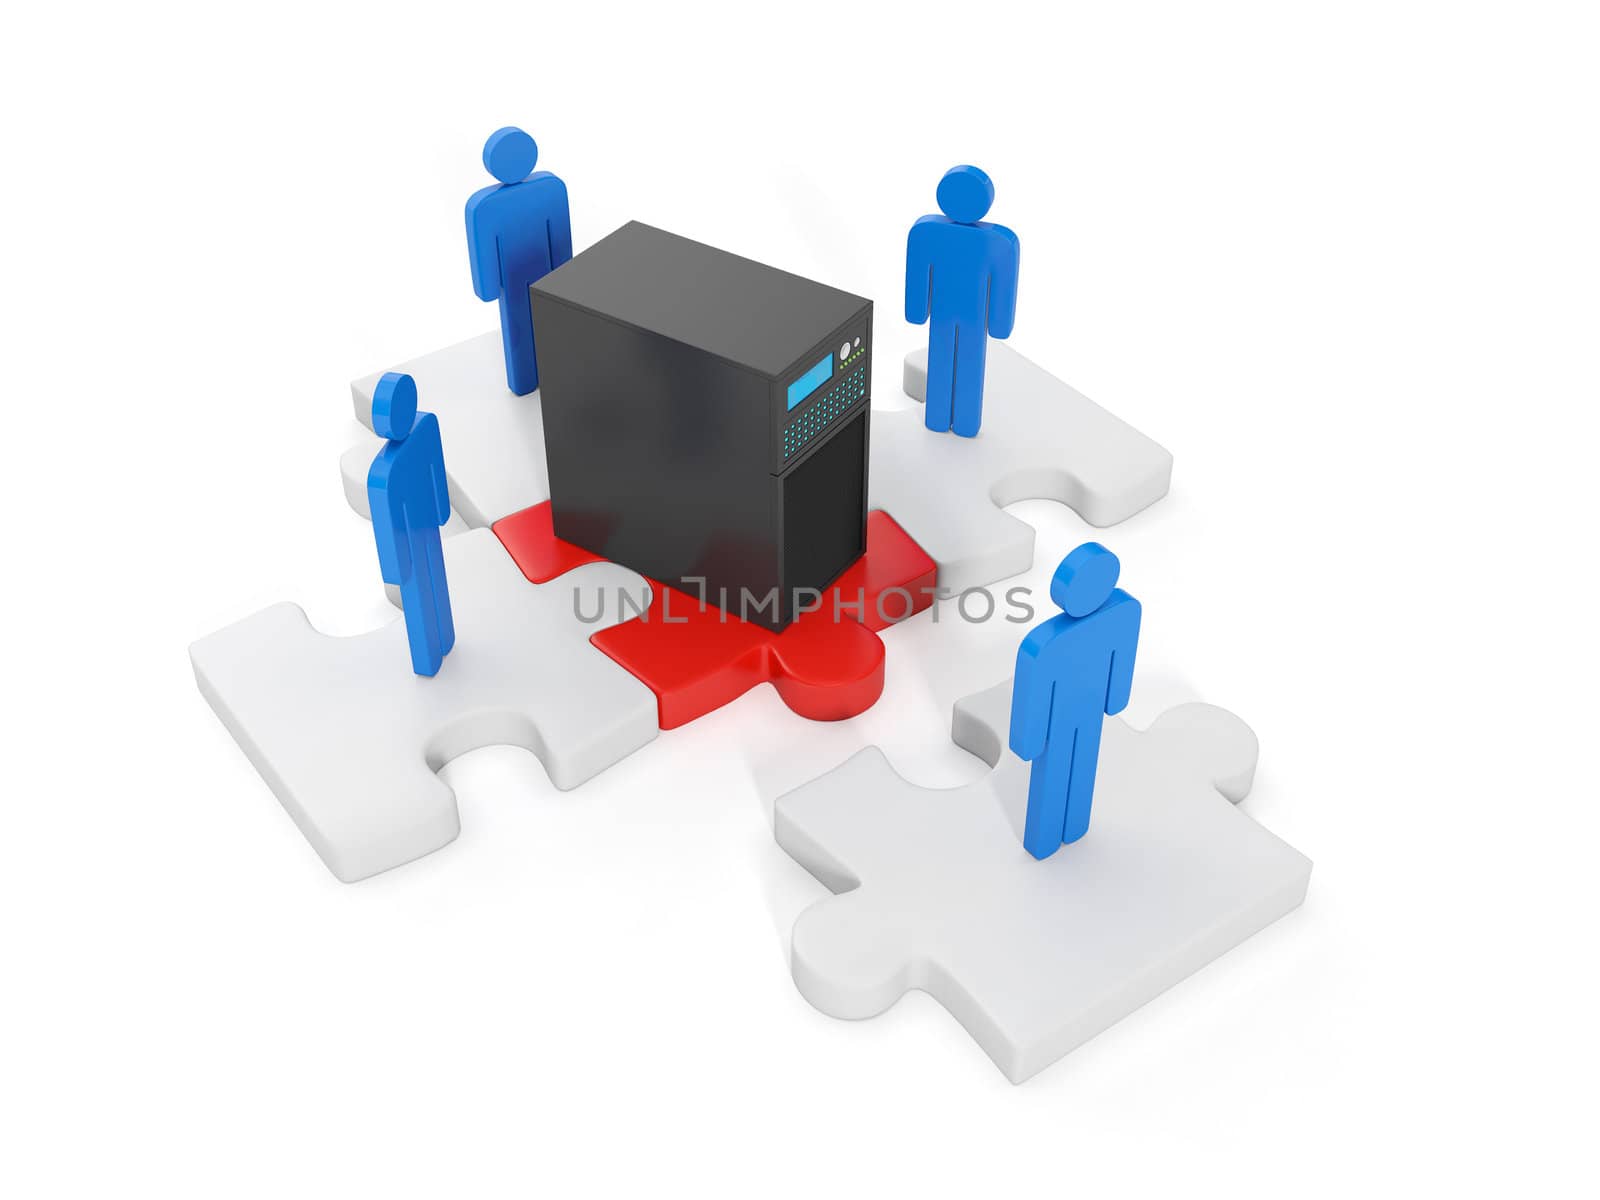 3d illustration of computer technologies. The concept of compound L
yudey the overall WLAN